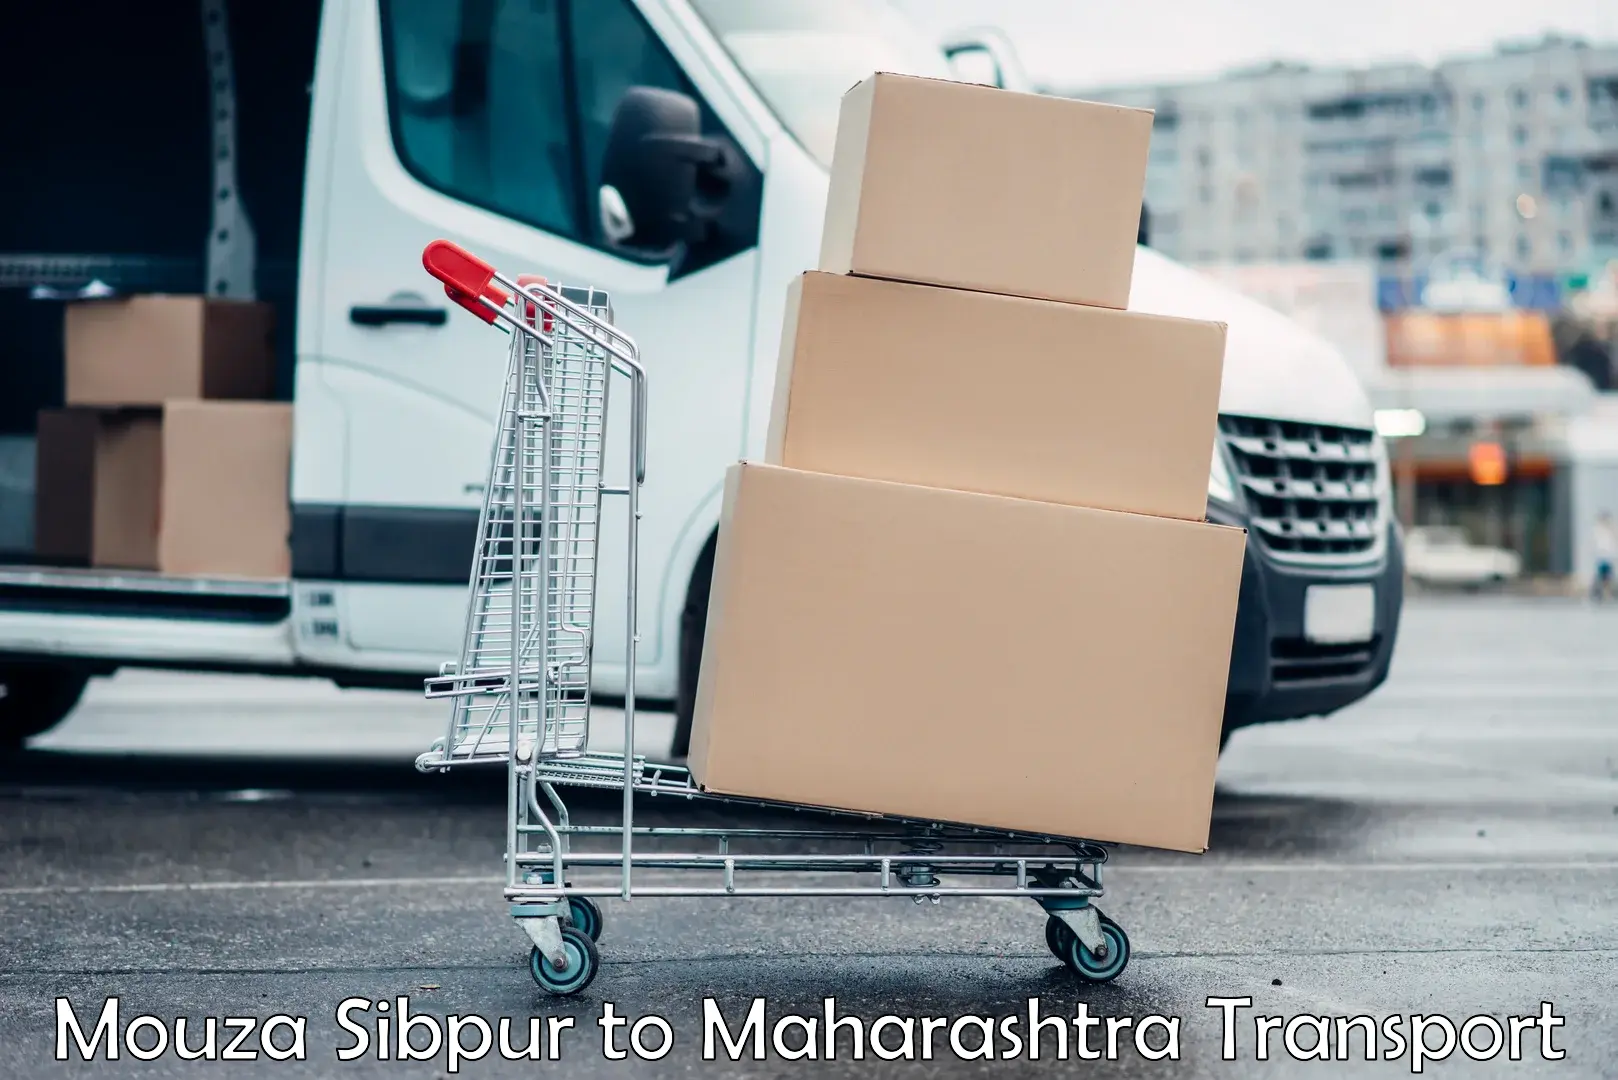 Goods delivery service Mouza Sibpur to Karjat